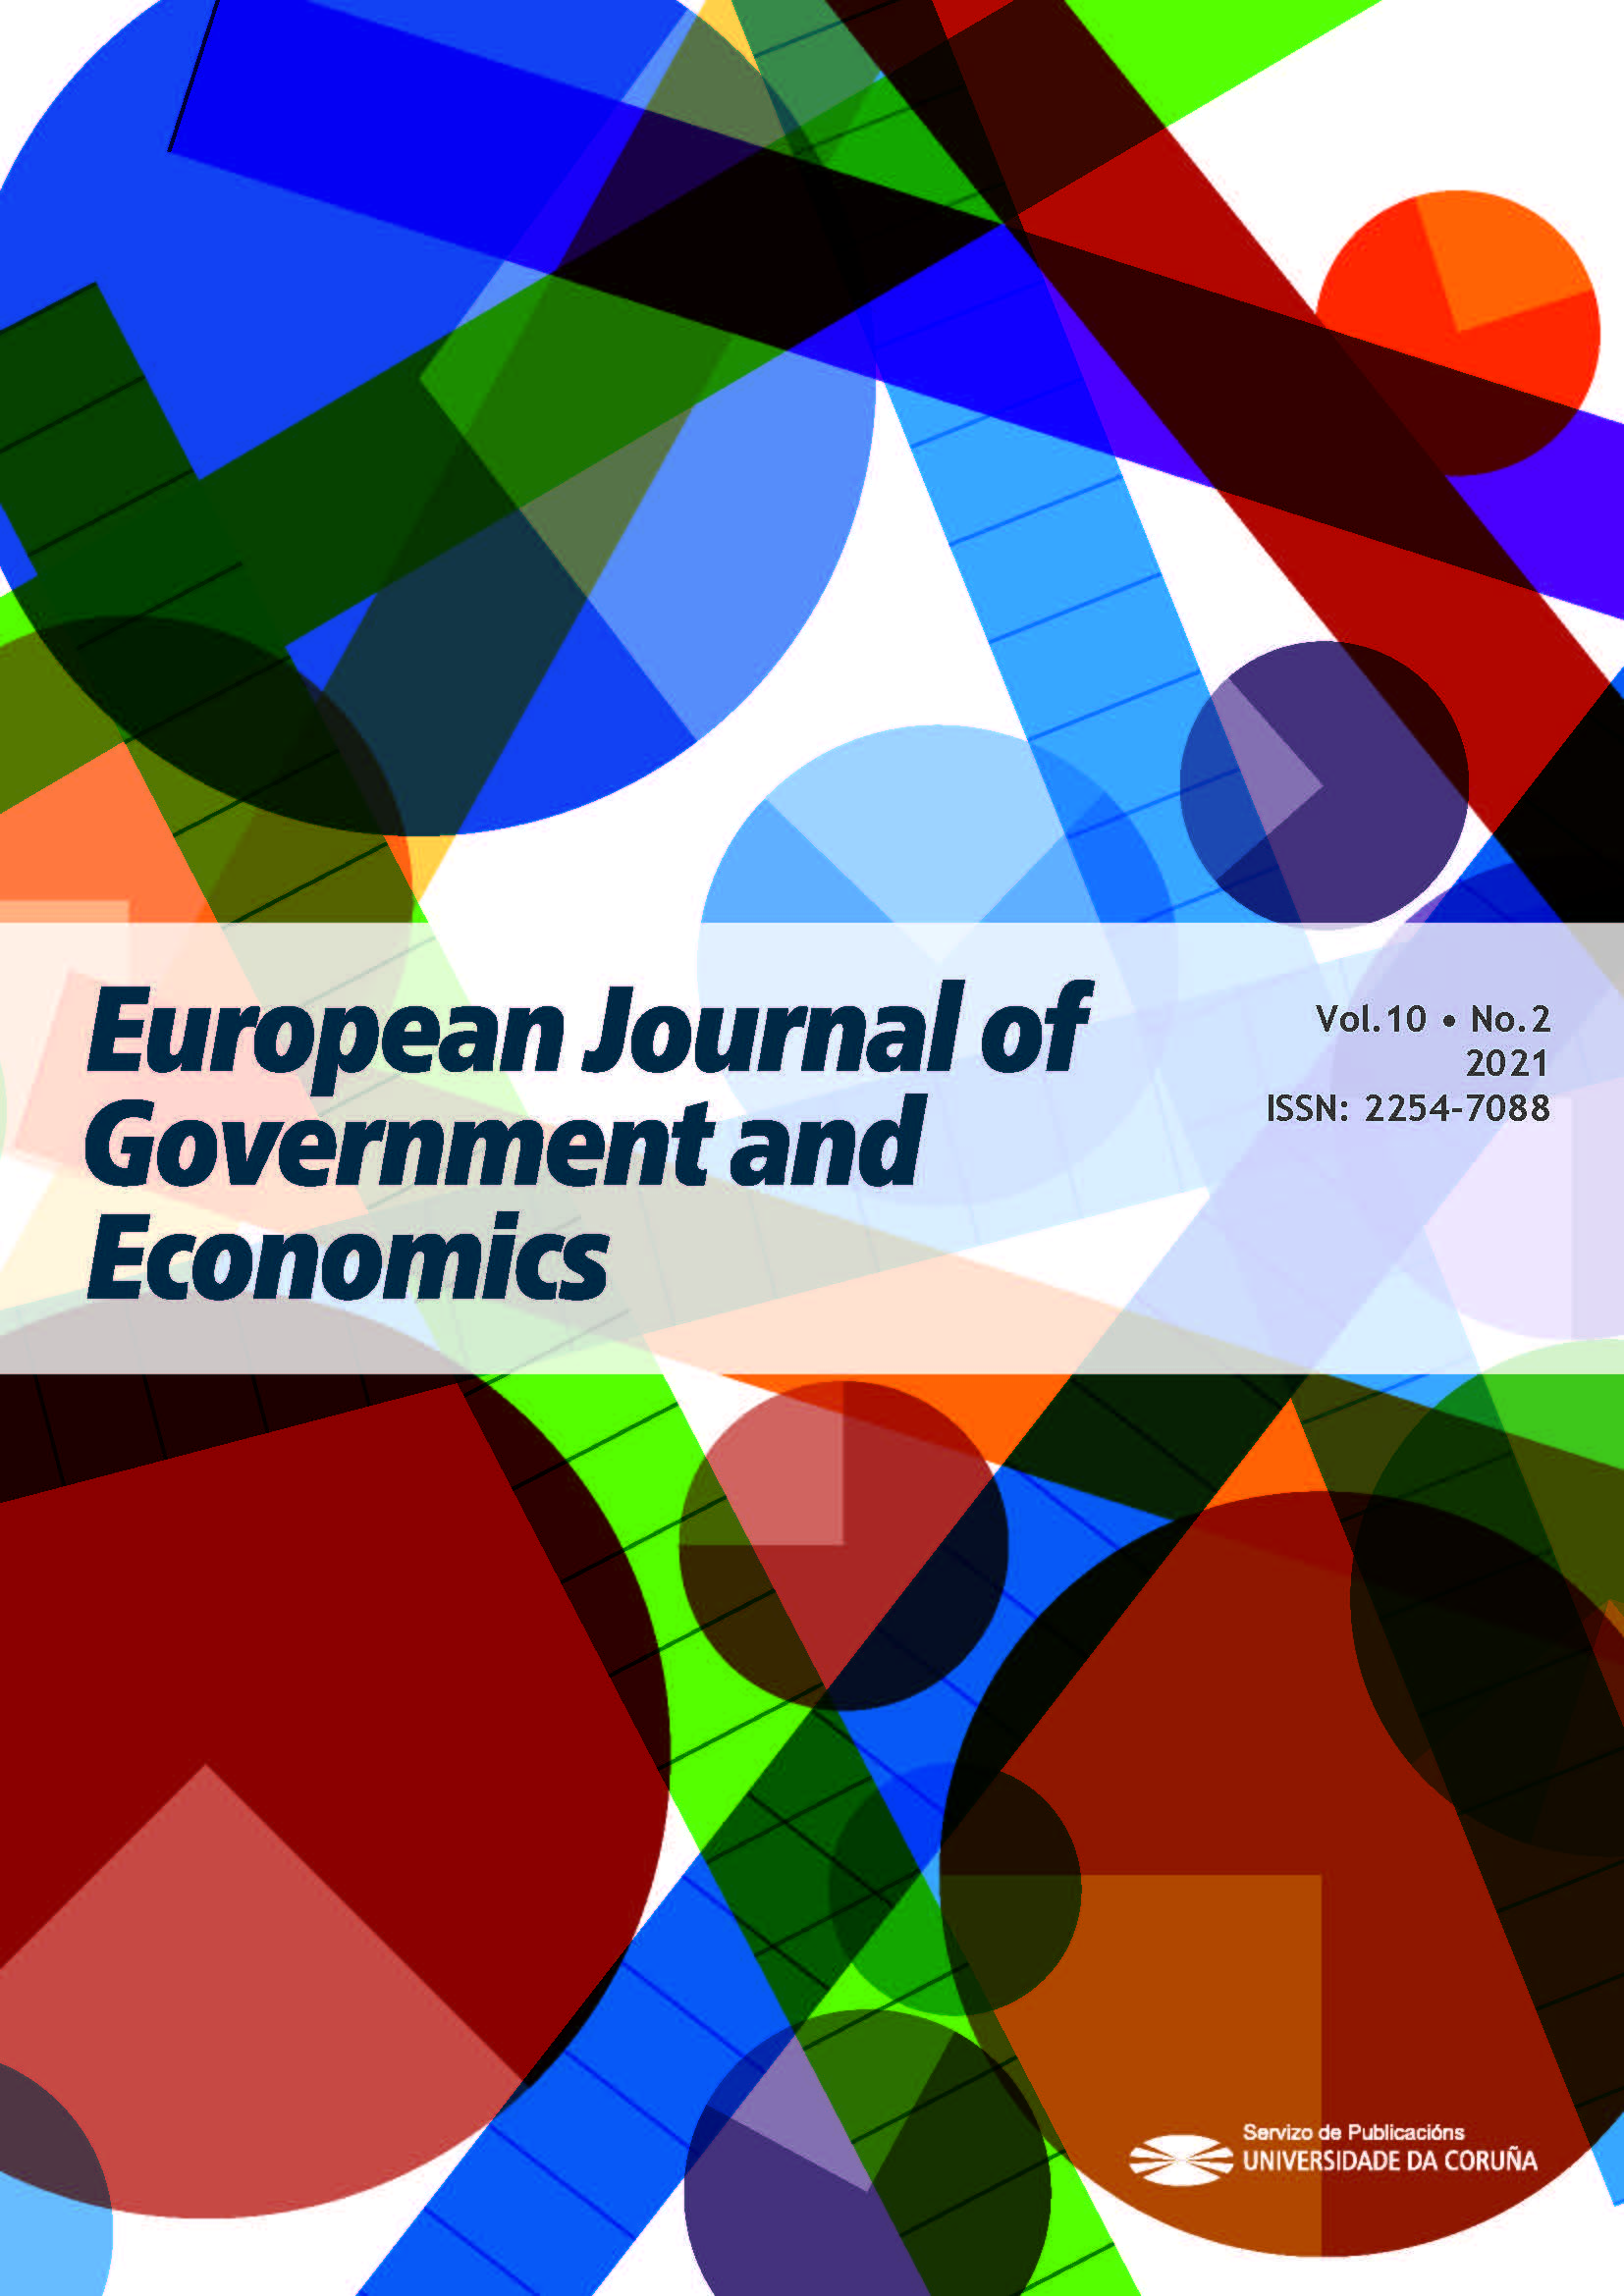 European Journal of Government and Economics